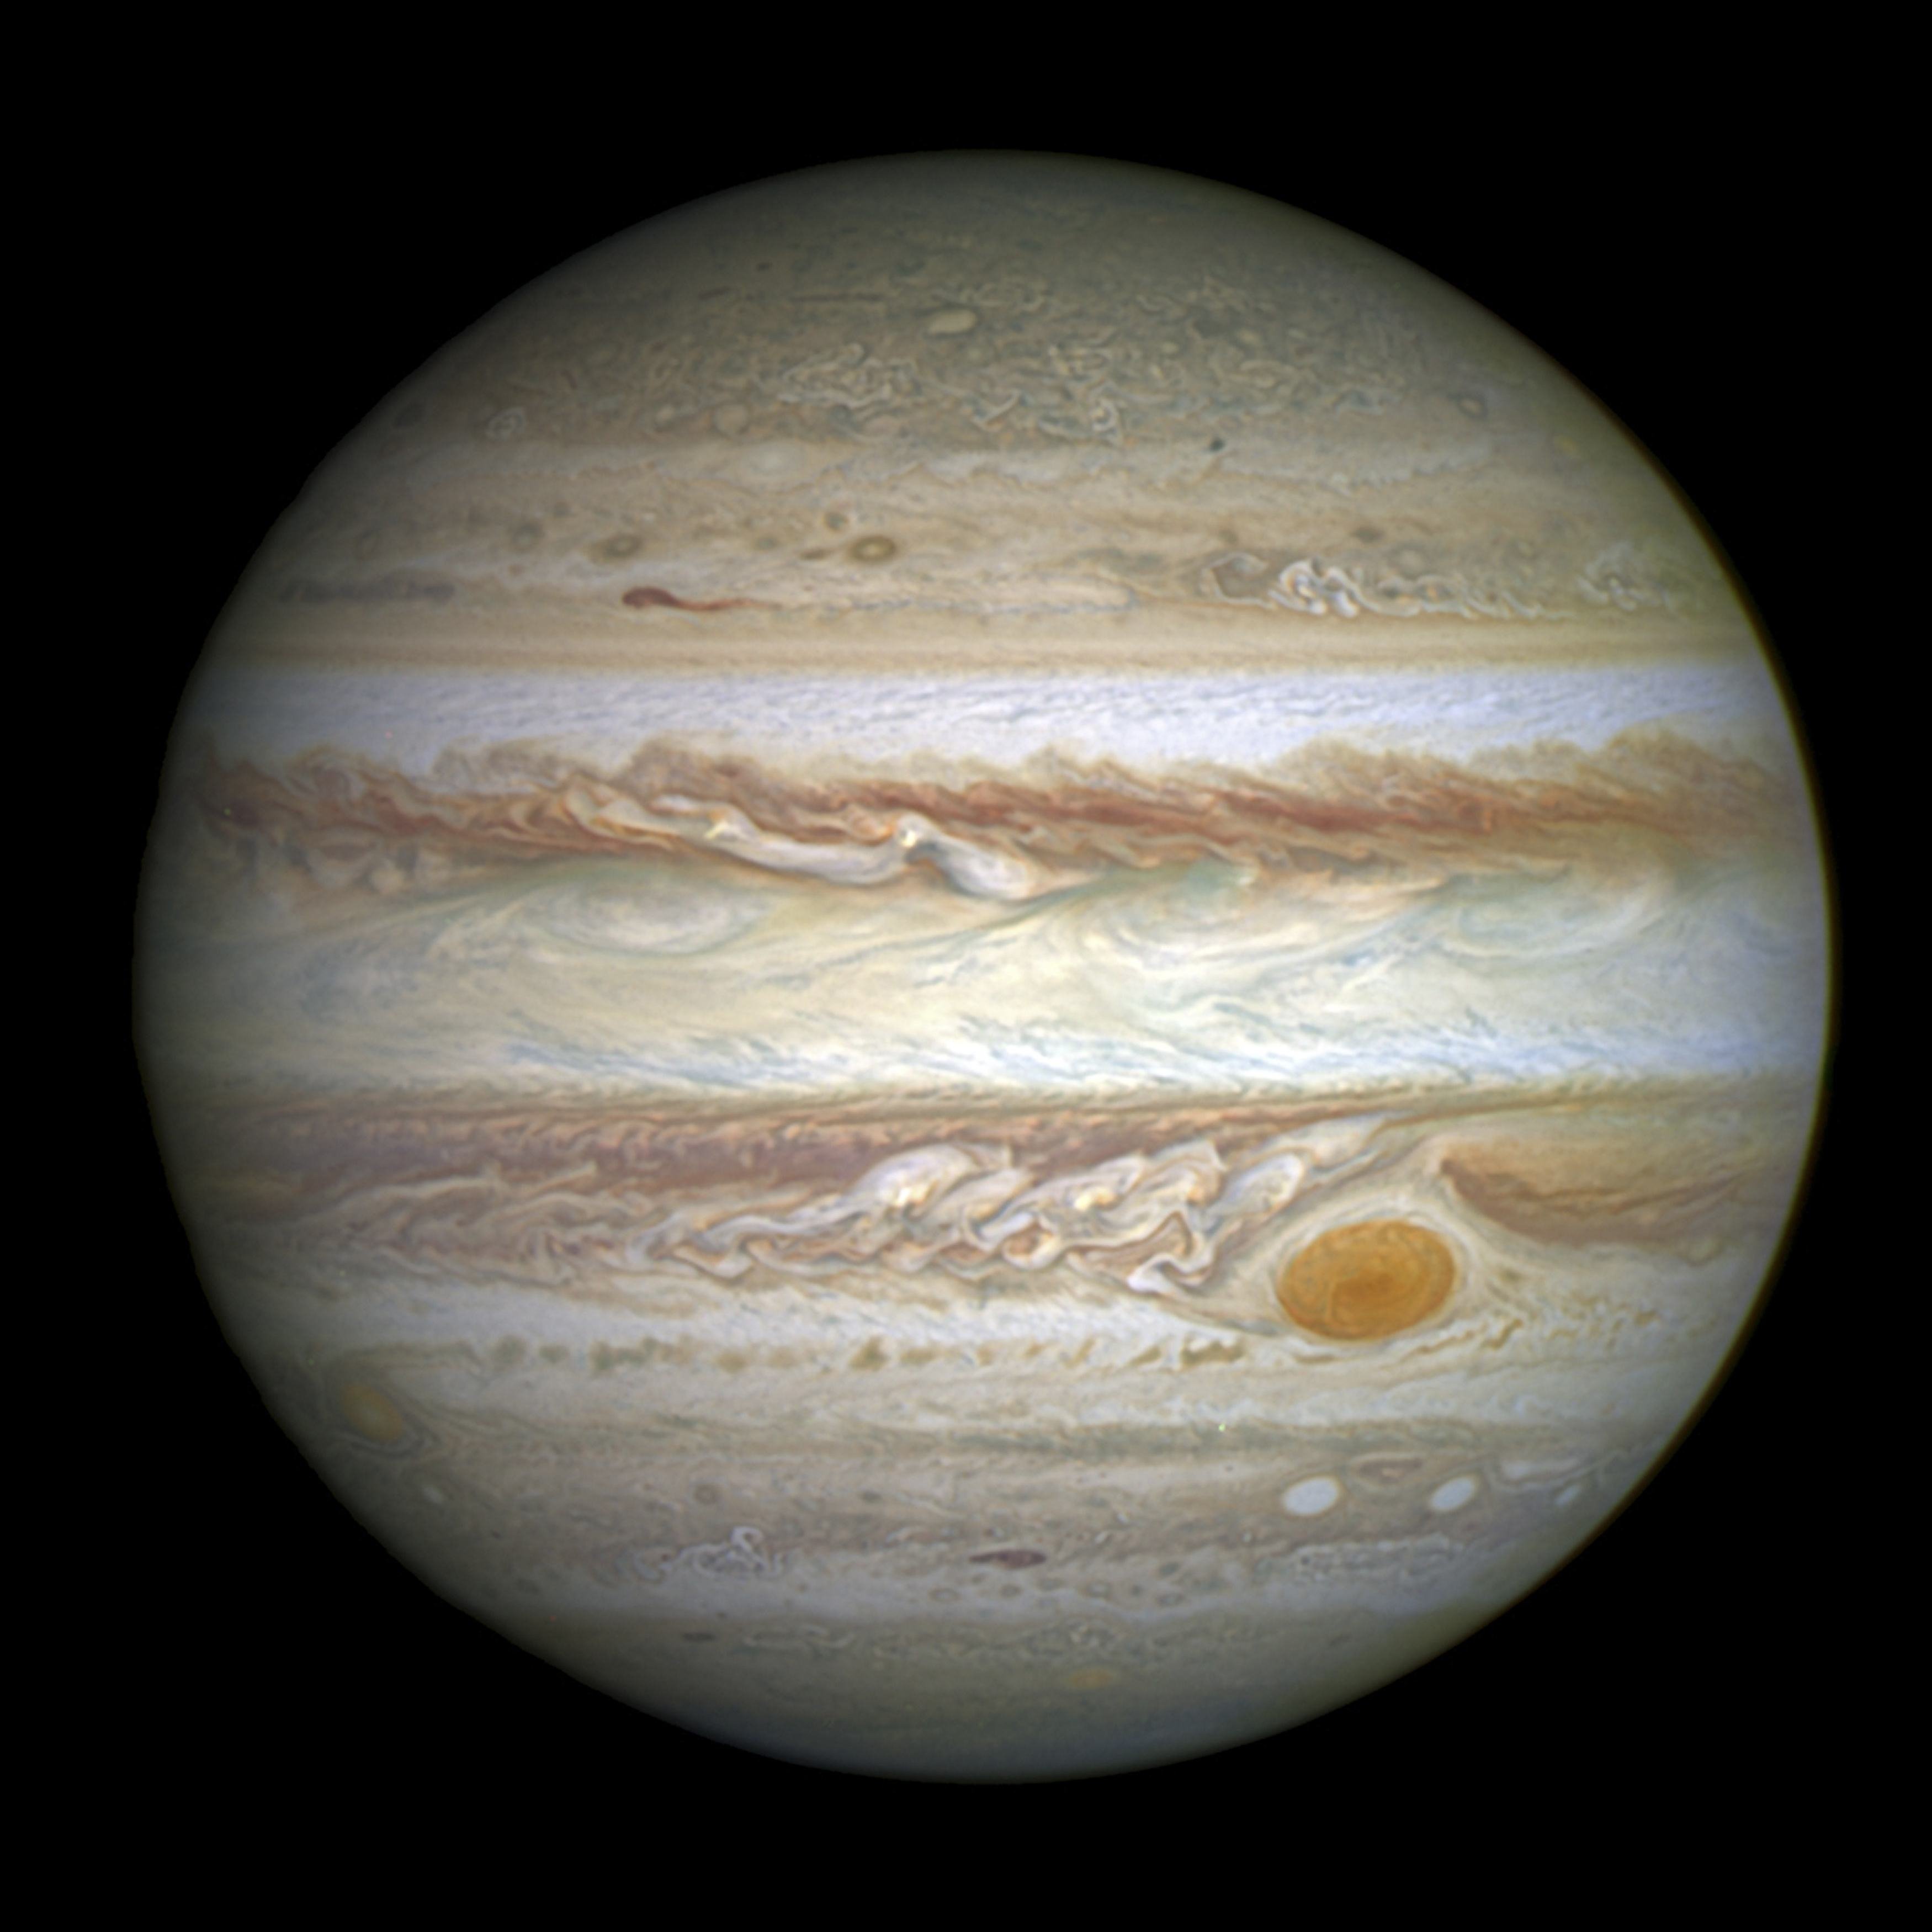 Jupiter's most distinctive feature - a giant red spot, is seen in this NASA handout photo taken by the Hubble Space Telescope of the planet, April 21, 2014. (NASA/Reuters)